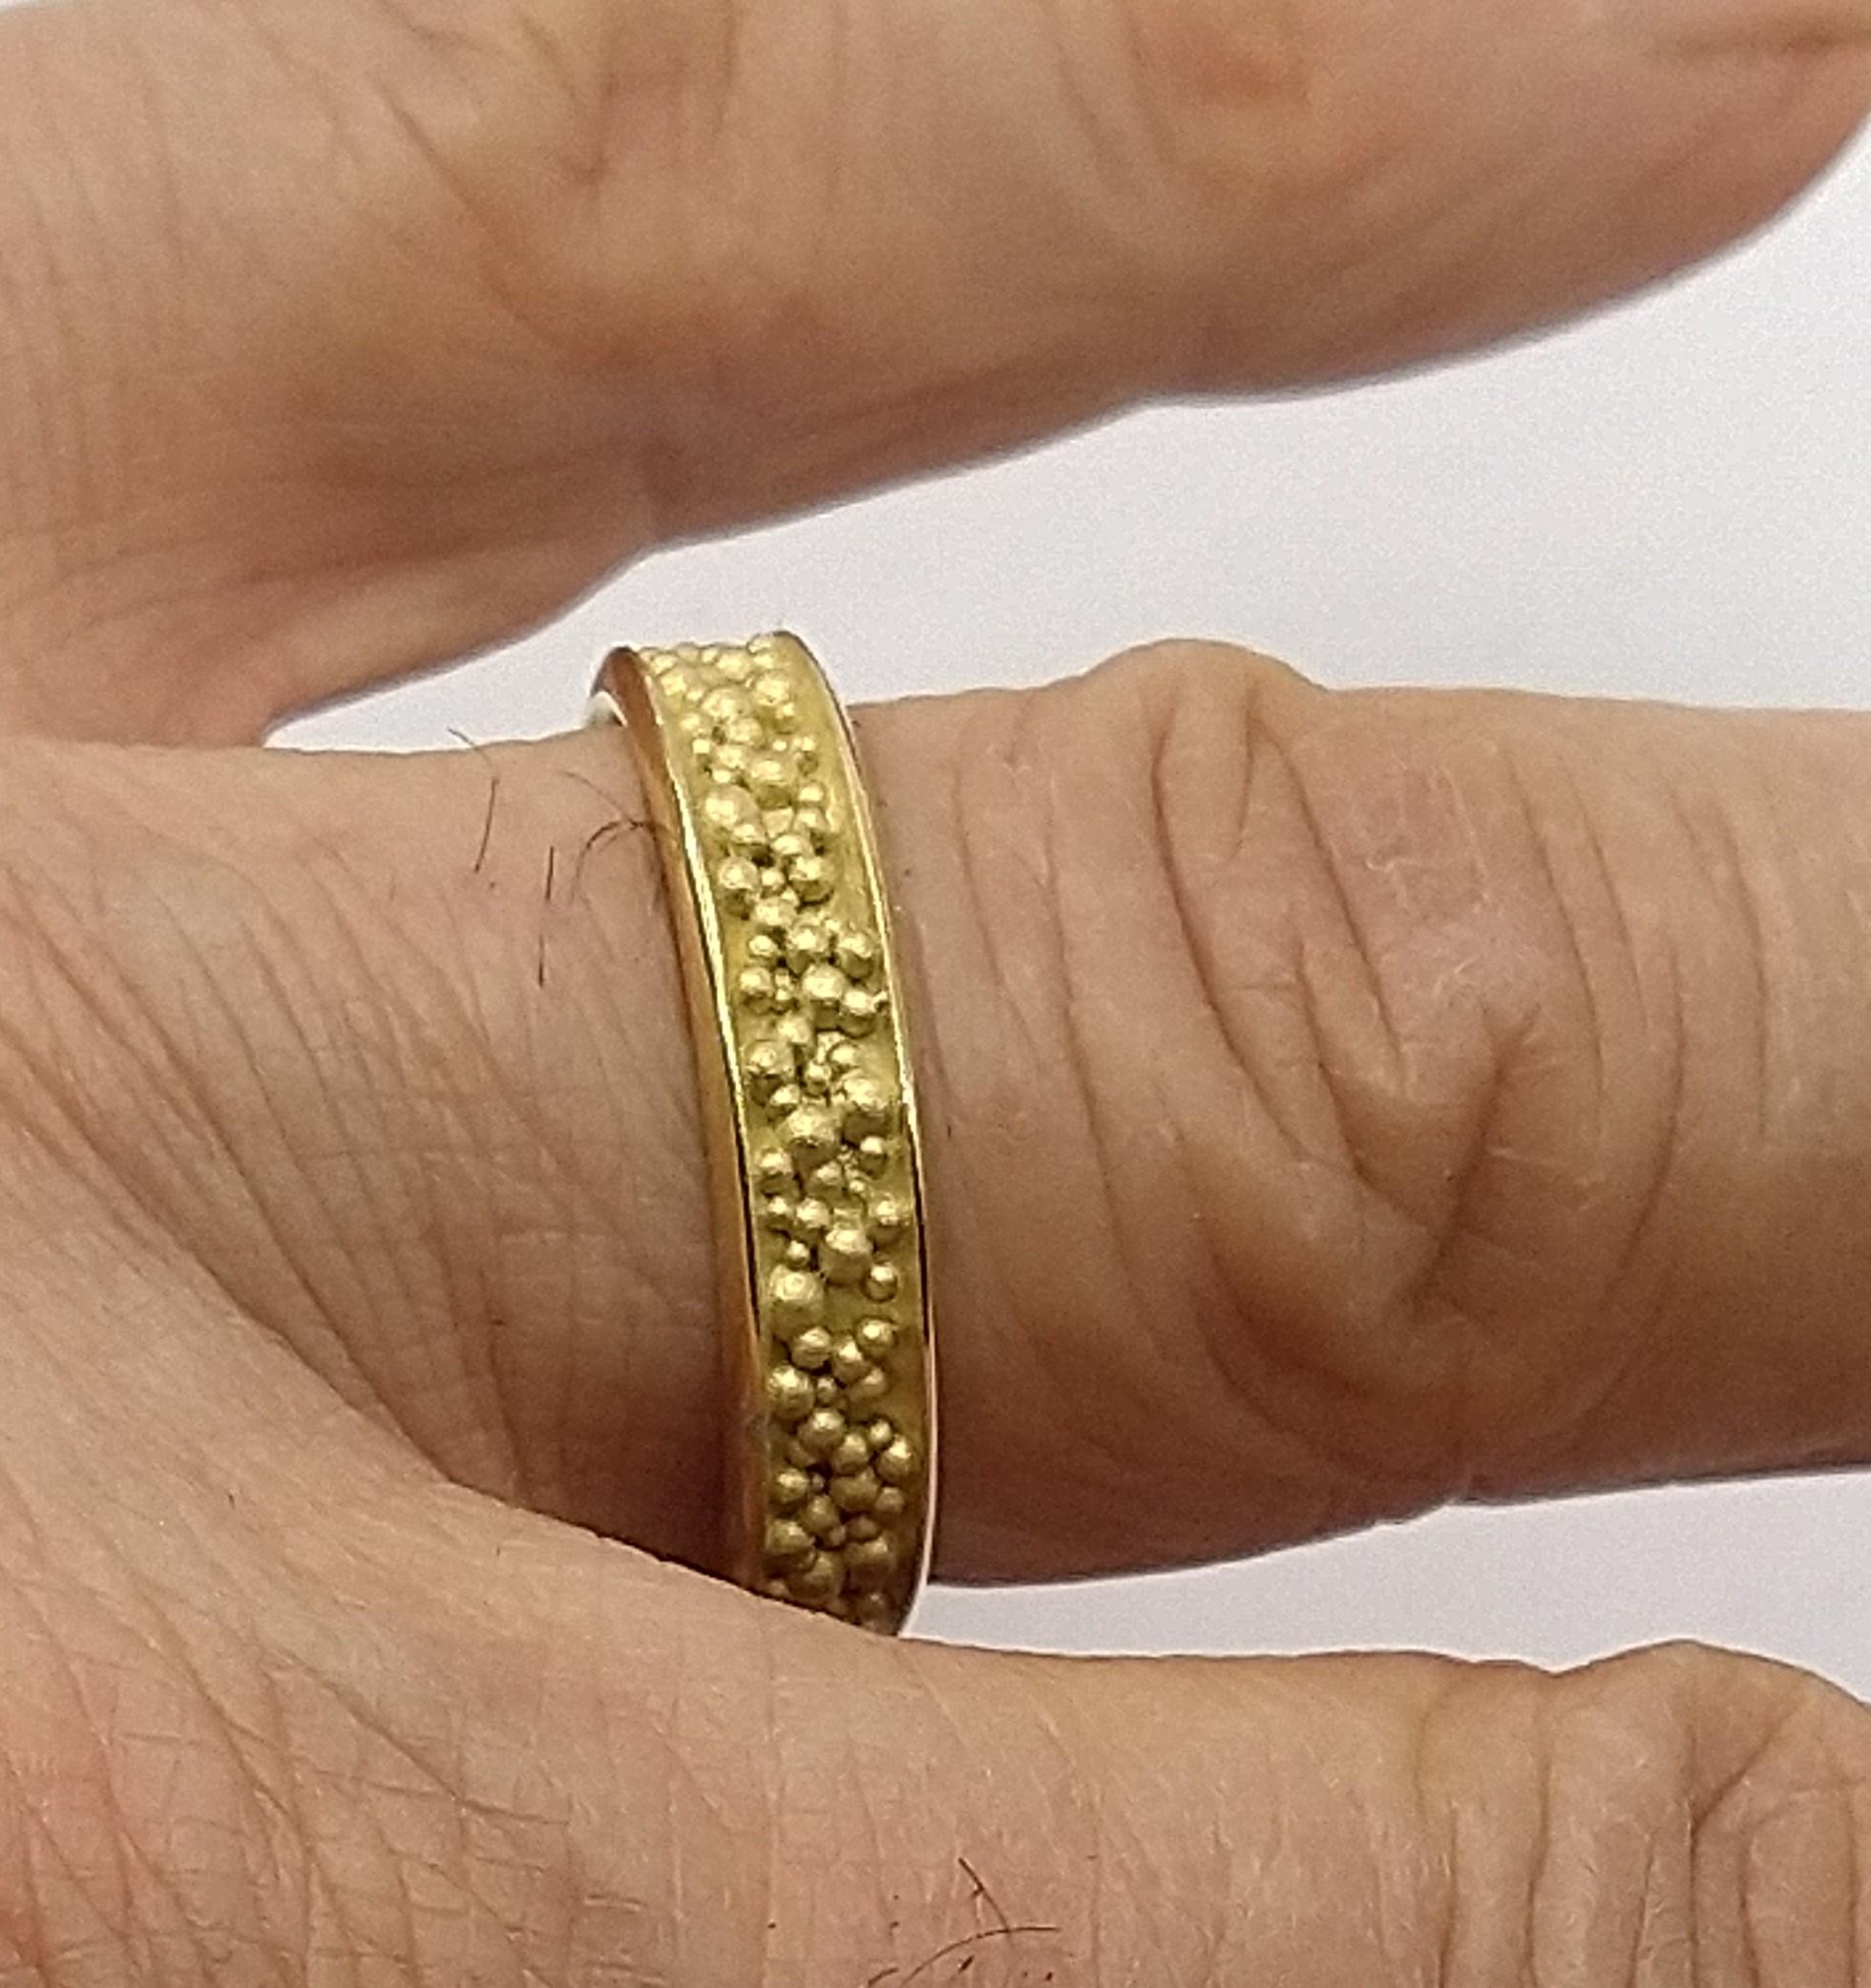 For Sale:  18k Yellow Gold Wedding Band 